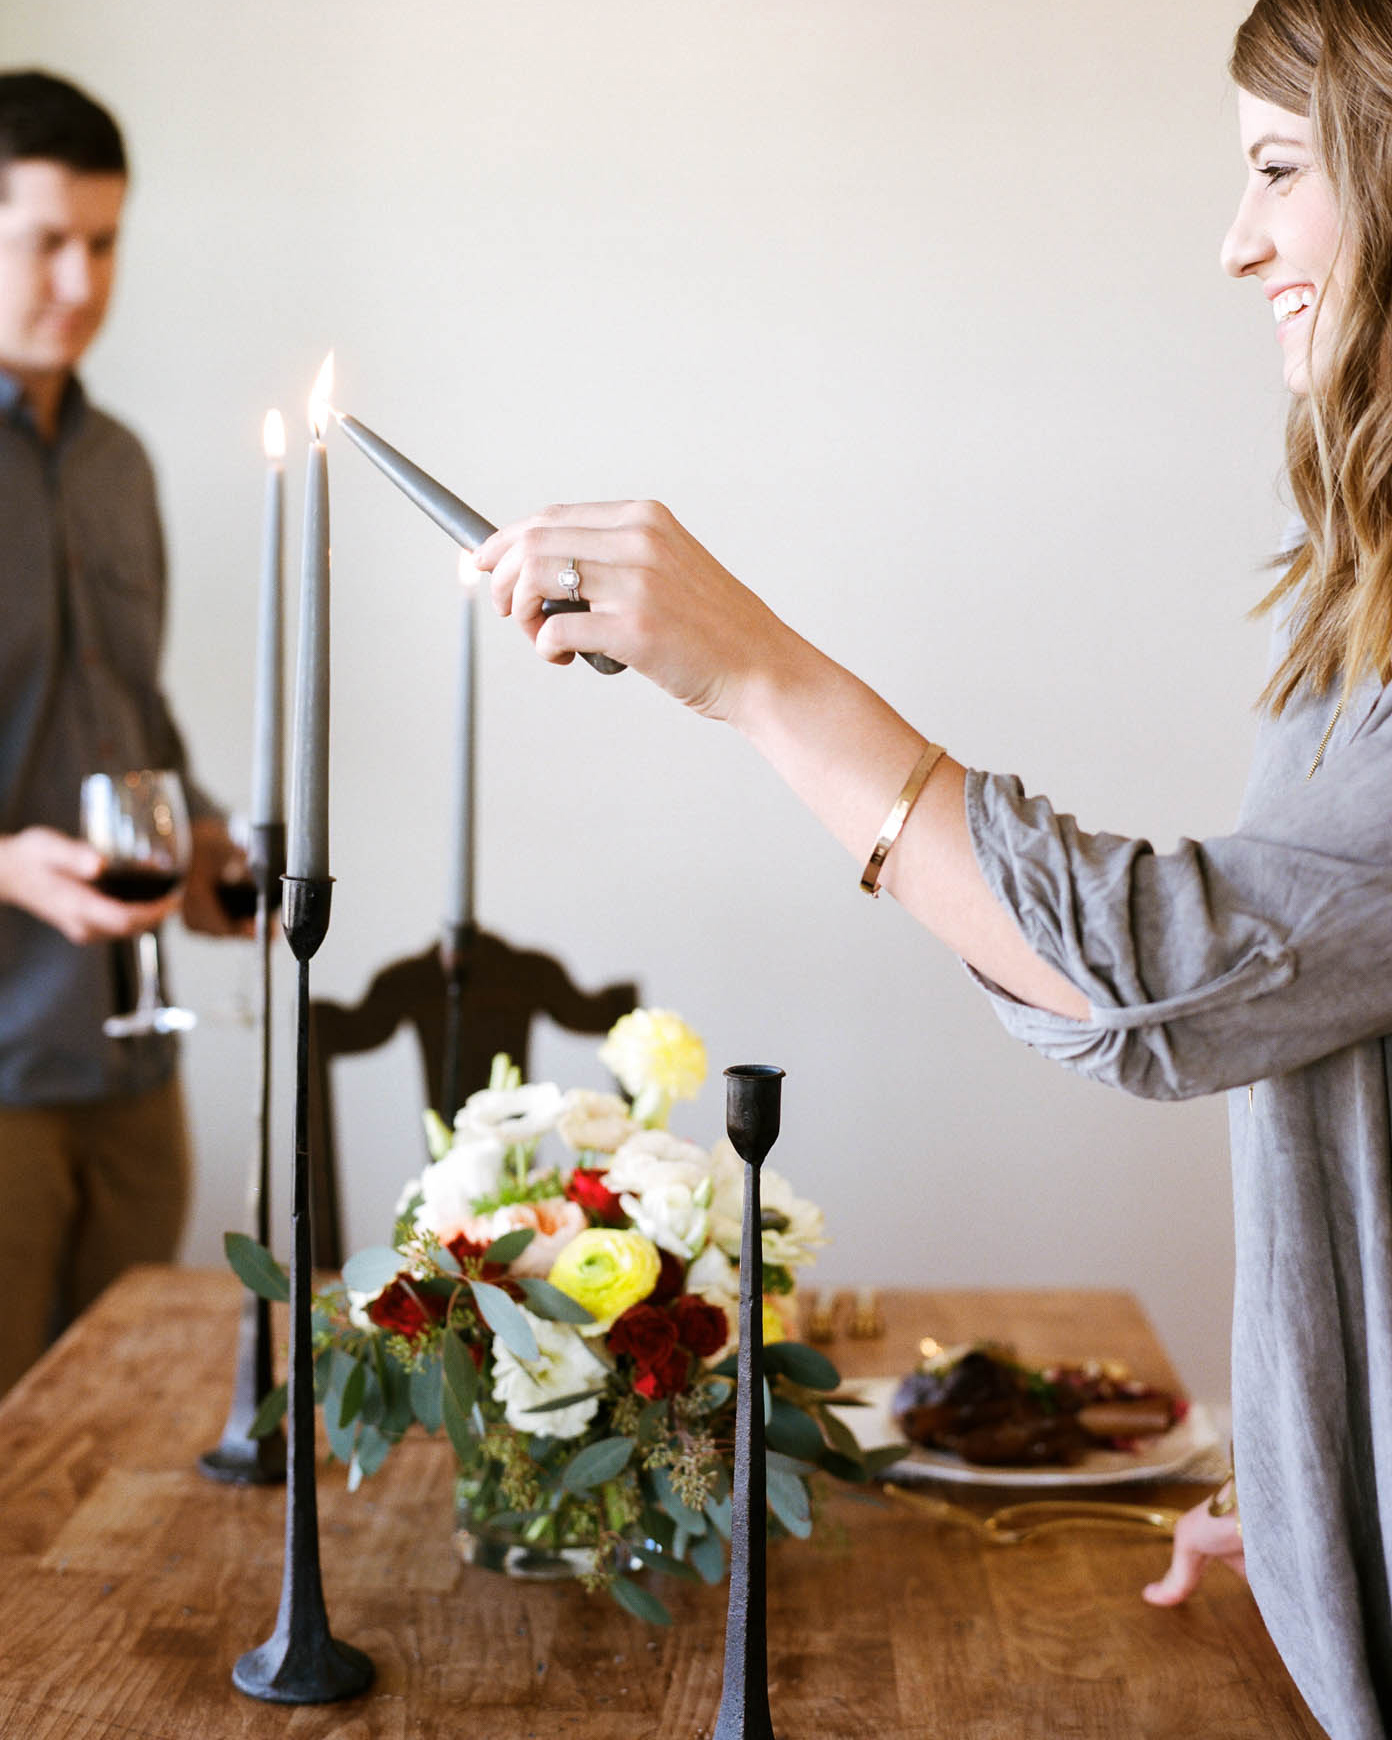 couple setting the table and lighting a candle for dinner